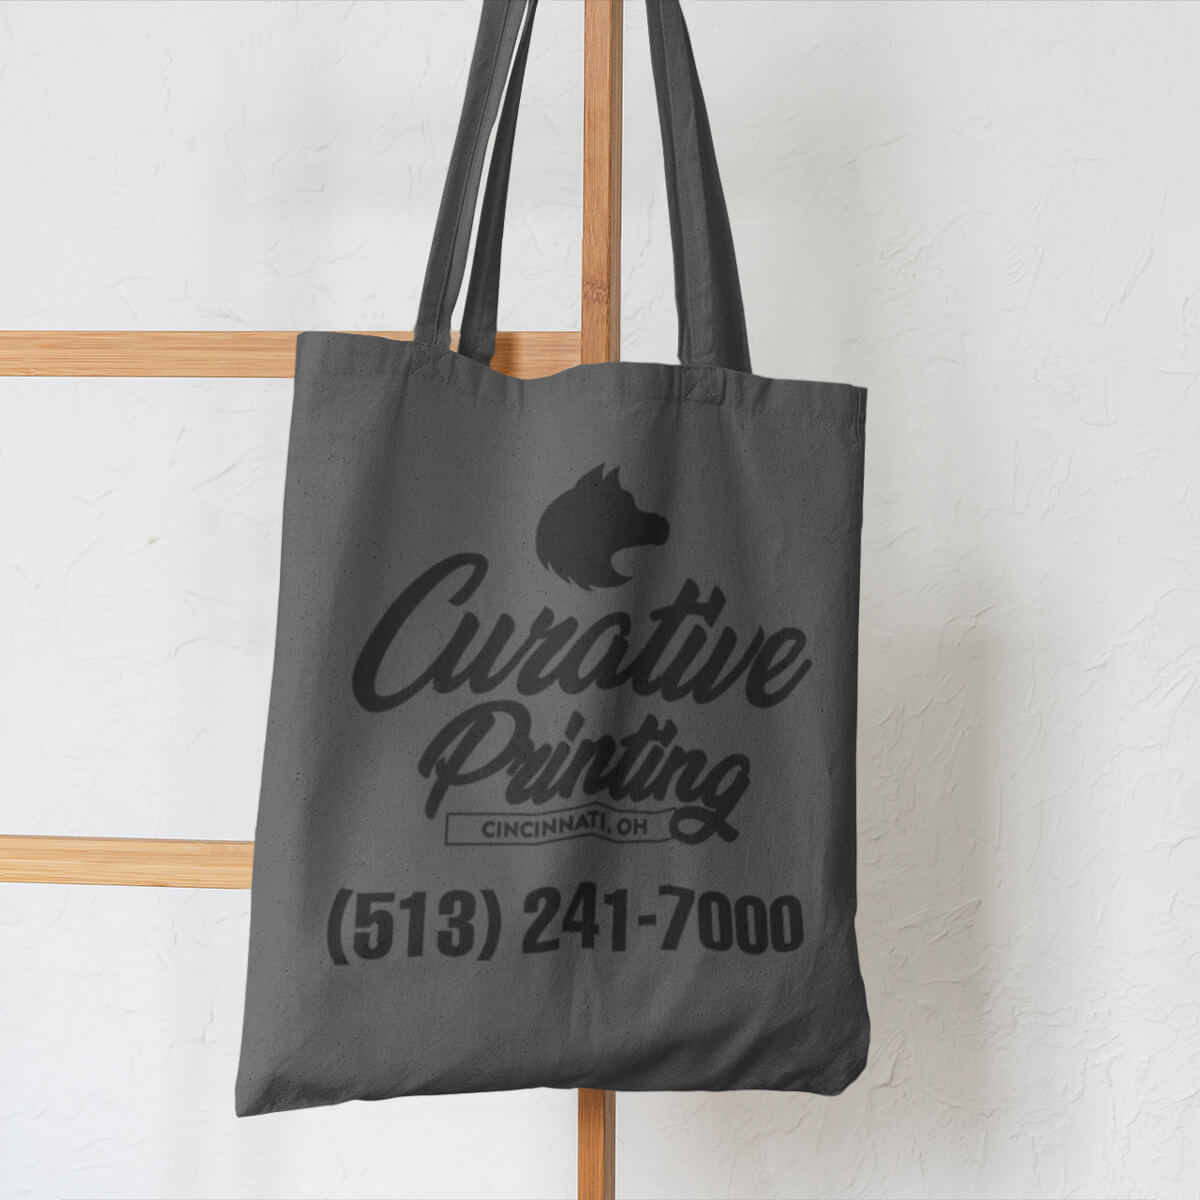 Grey with black imprint custom promotional tote bags by curative printing